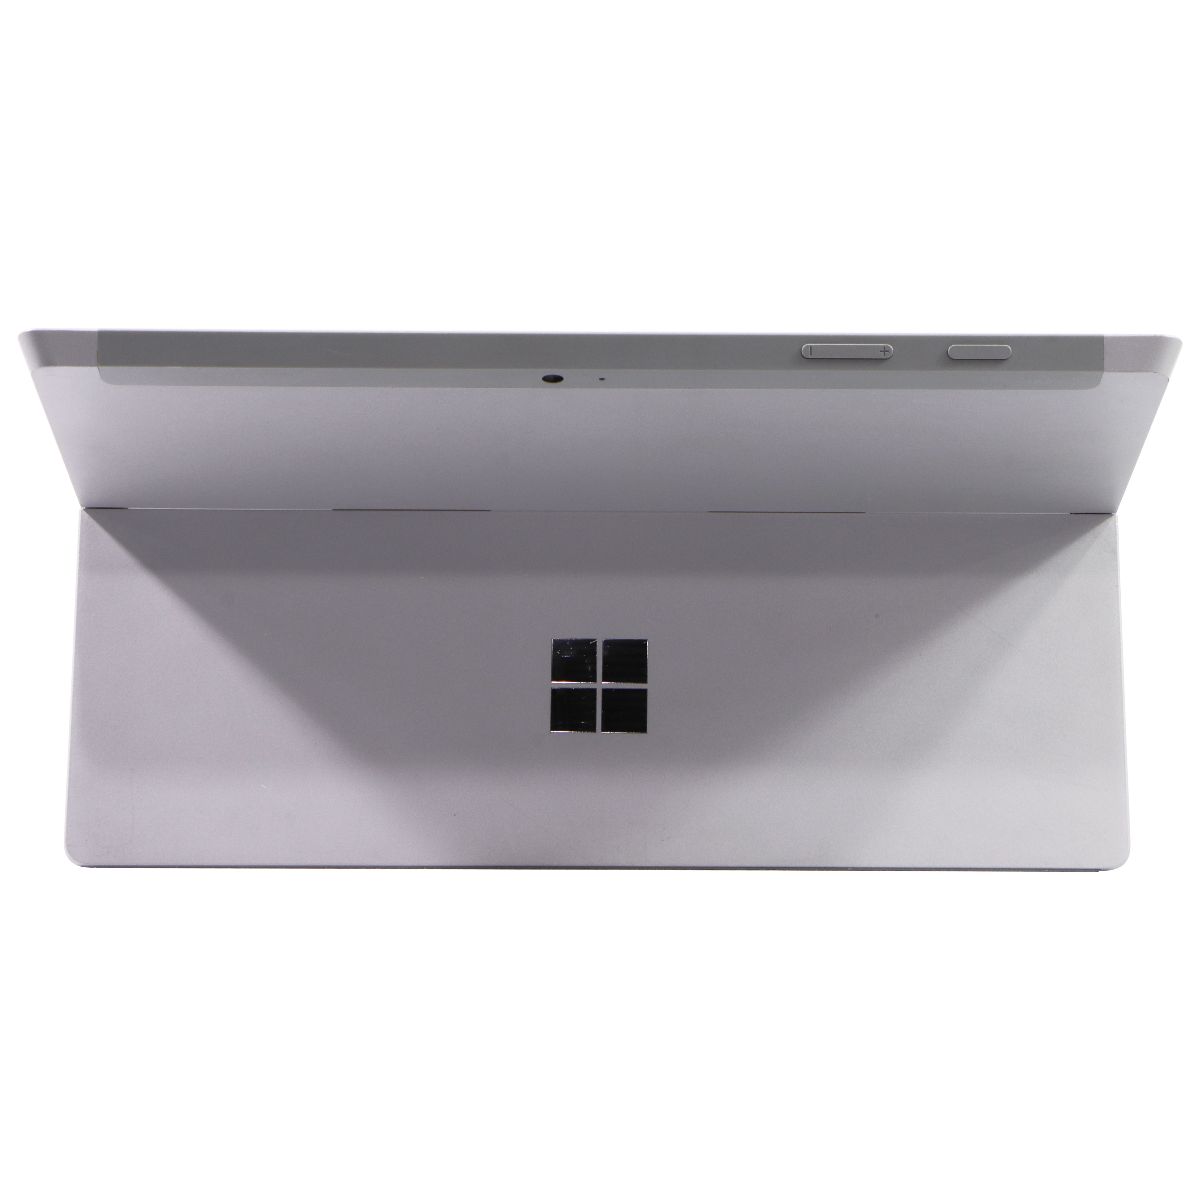 Microsoft Surface 3 (10.8) 1657 (Wifi + AT&T) Intel x7-Z8700/128GB/4GB/10 Pro iPads, Tablets & eBook Readers Microsoft    - Simple Cell Bulk Wholesale Pricing - USA Seller